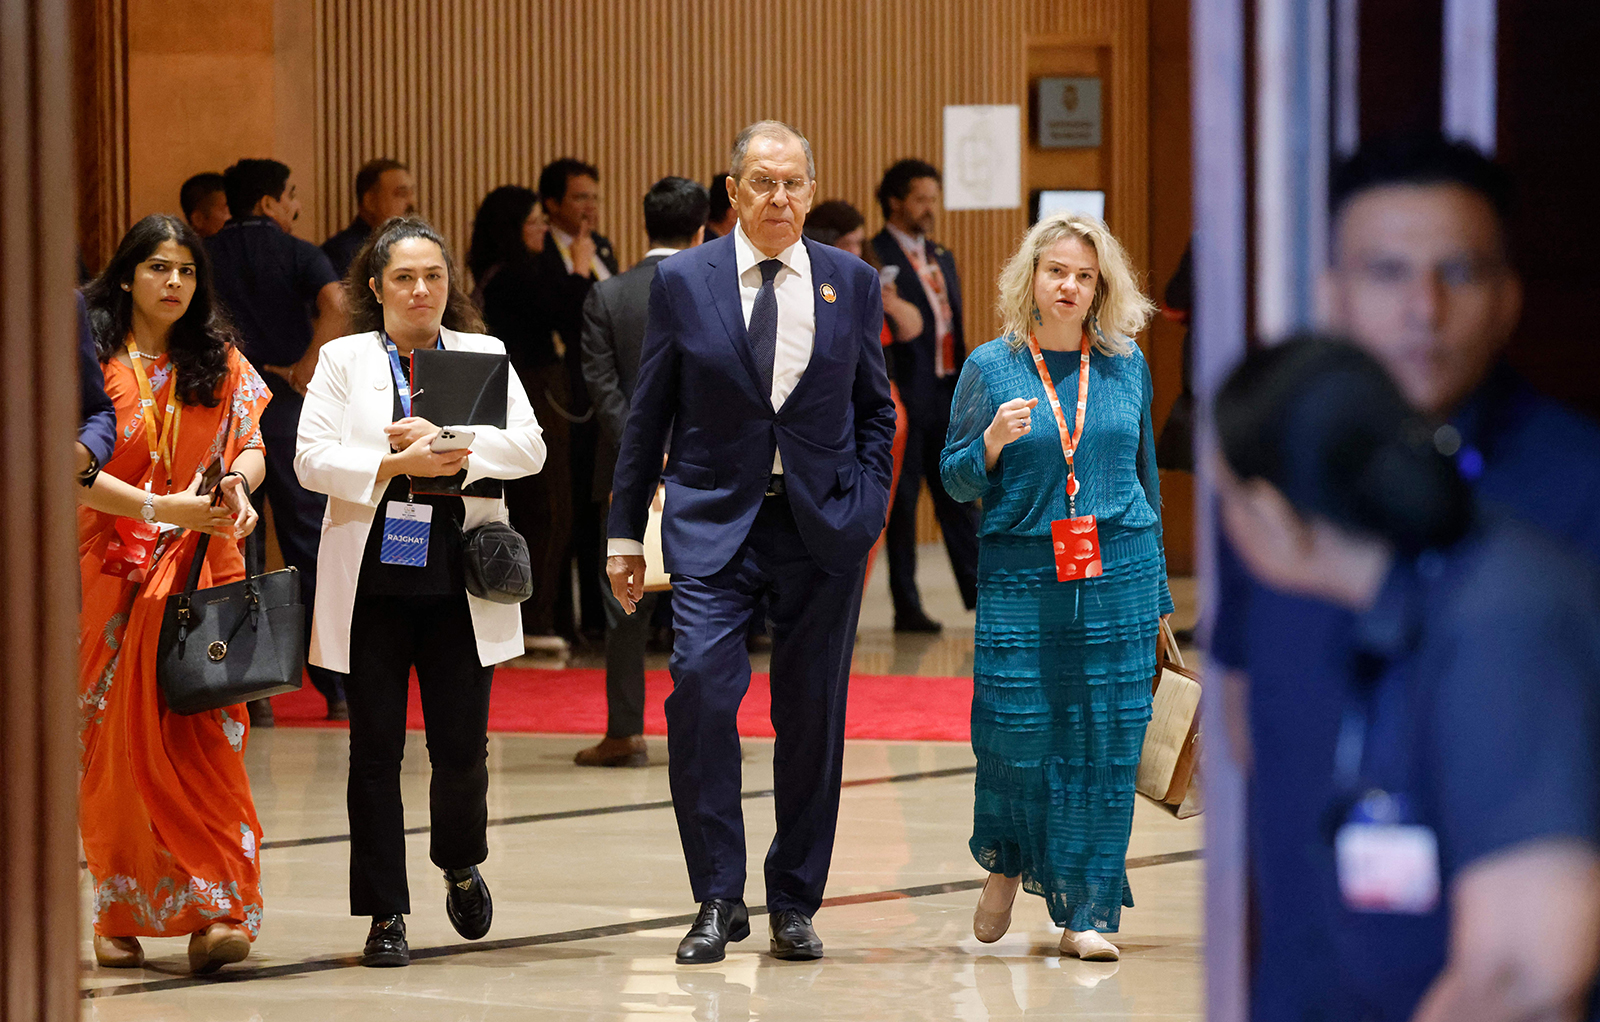 Sergei Lavrov walks after the closing session of the G20 summit in New Delhi on September 10.